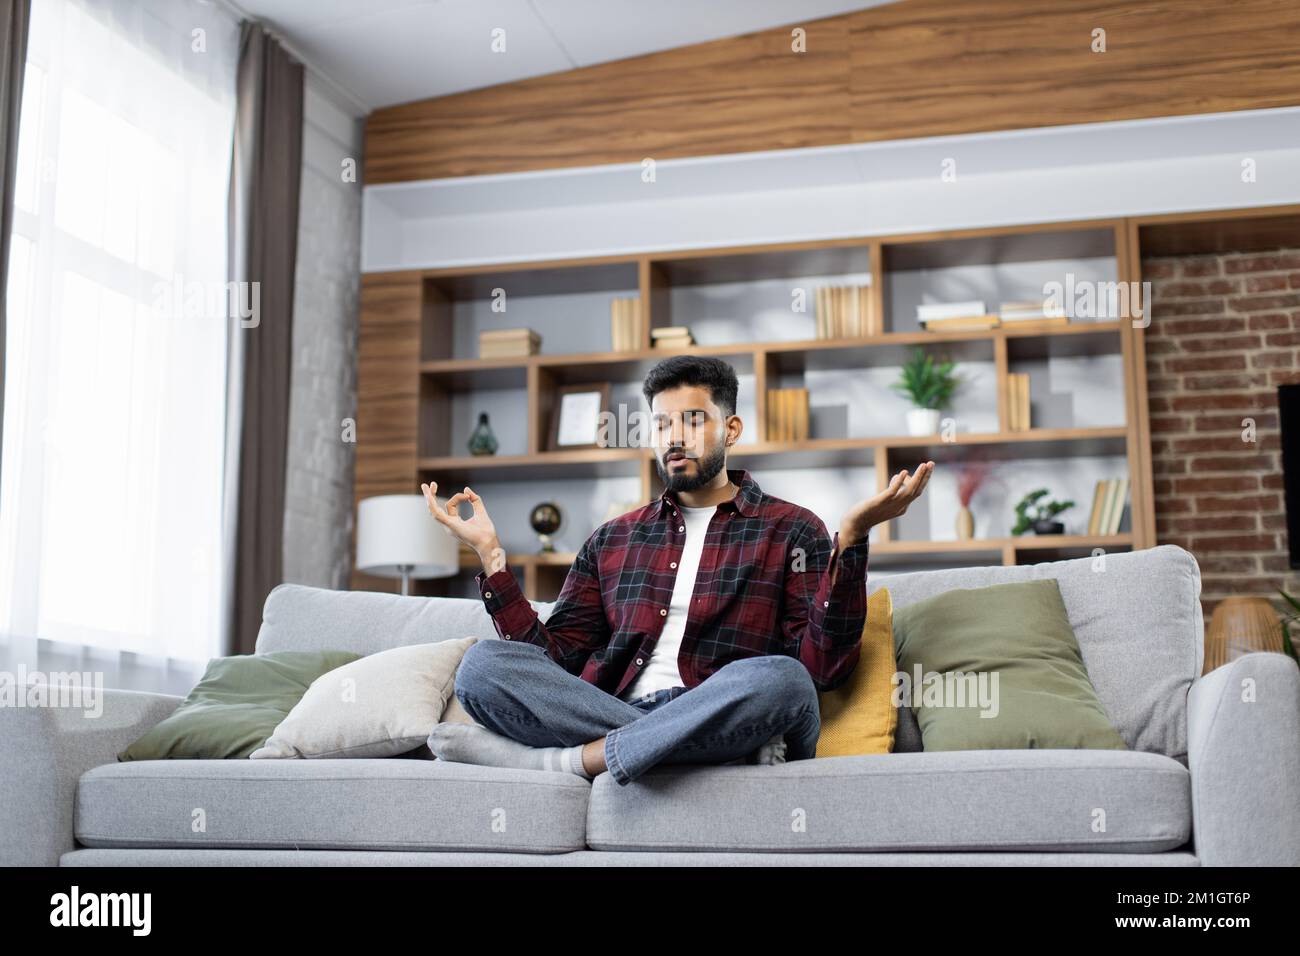 Yong male sitting on couch in lotus pose put hands on lap folded fingers closed eyes enjoy meditation do yoga exercise at home. No stress healthy habit mindfulness lifestyle anxiety relief concept Stock Photo